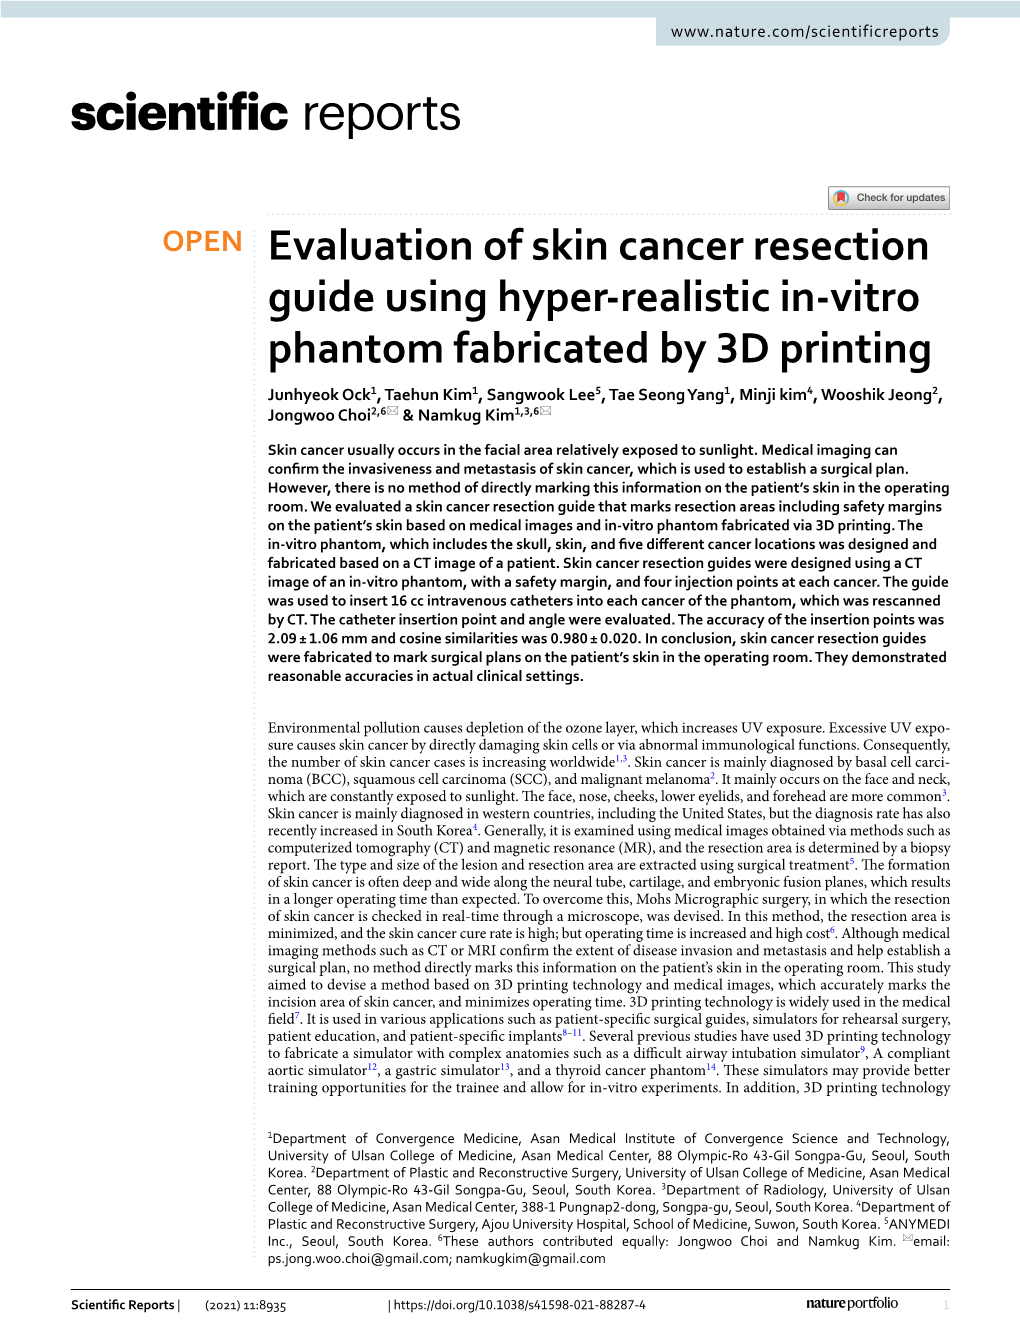 Evaluation of Skin Cancer Resection Guide Using Hyper-Realistic In-Vitro Phantom Fabricated by 3D Printing